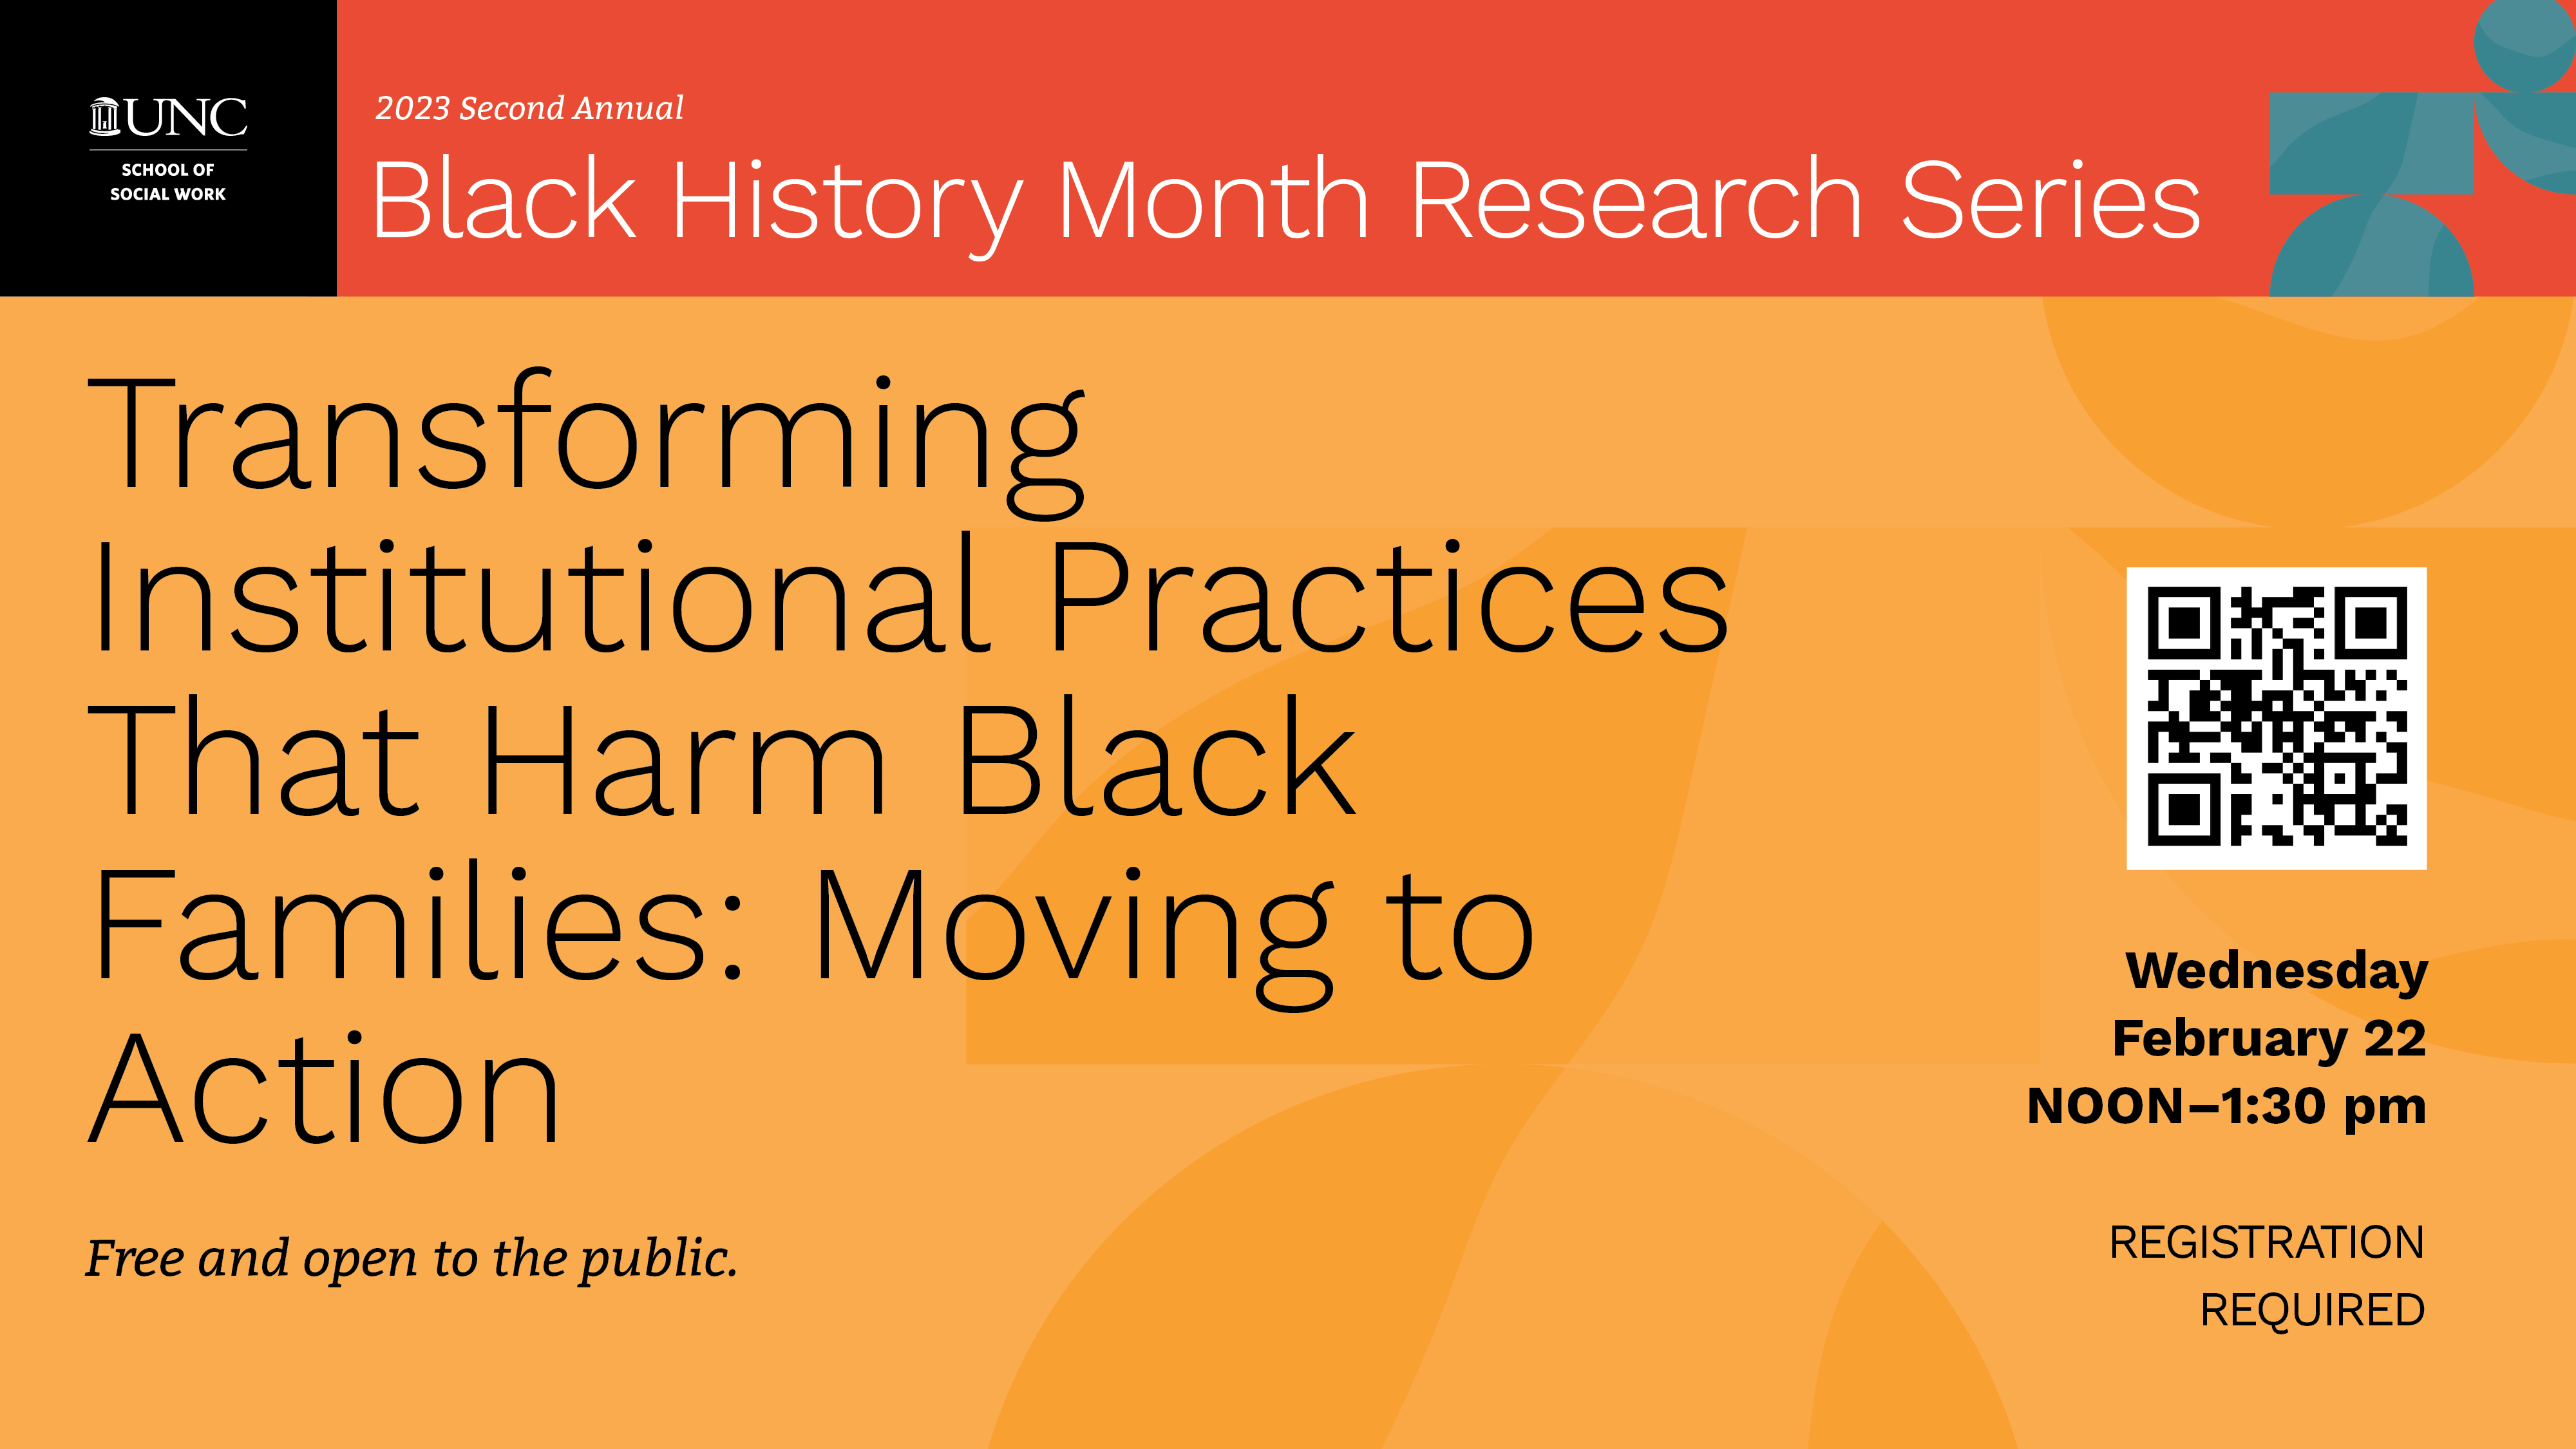 Transforming Institutional Practices that Harm Black Families: Moving to Action